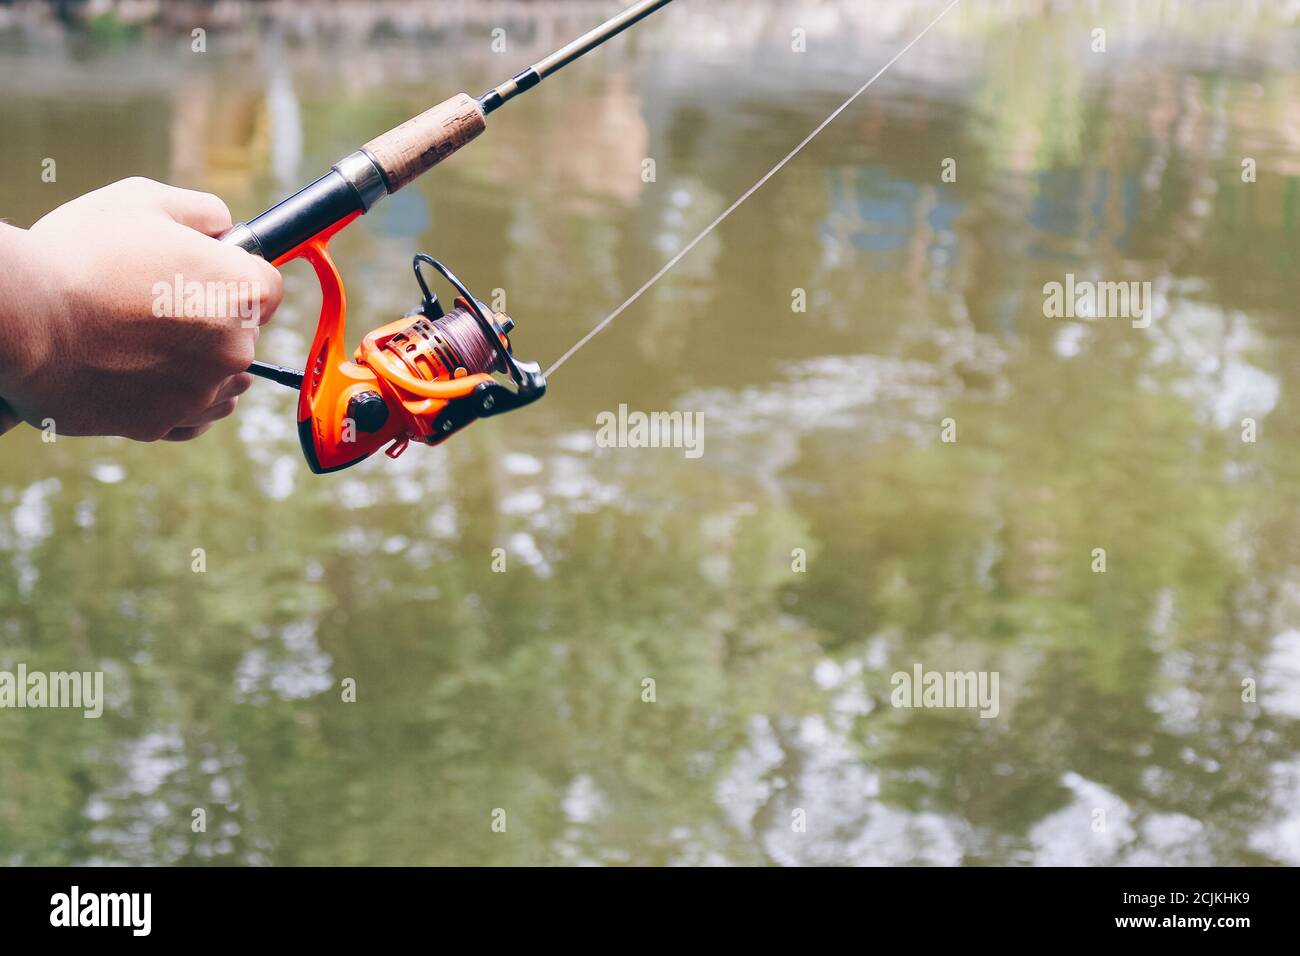 Close up of spinning with the fishing reel in the hand, fishing hook on the  line with the bait in the left hand against the background of the water  Stock Photo 